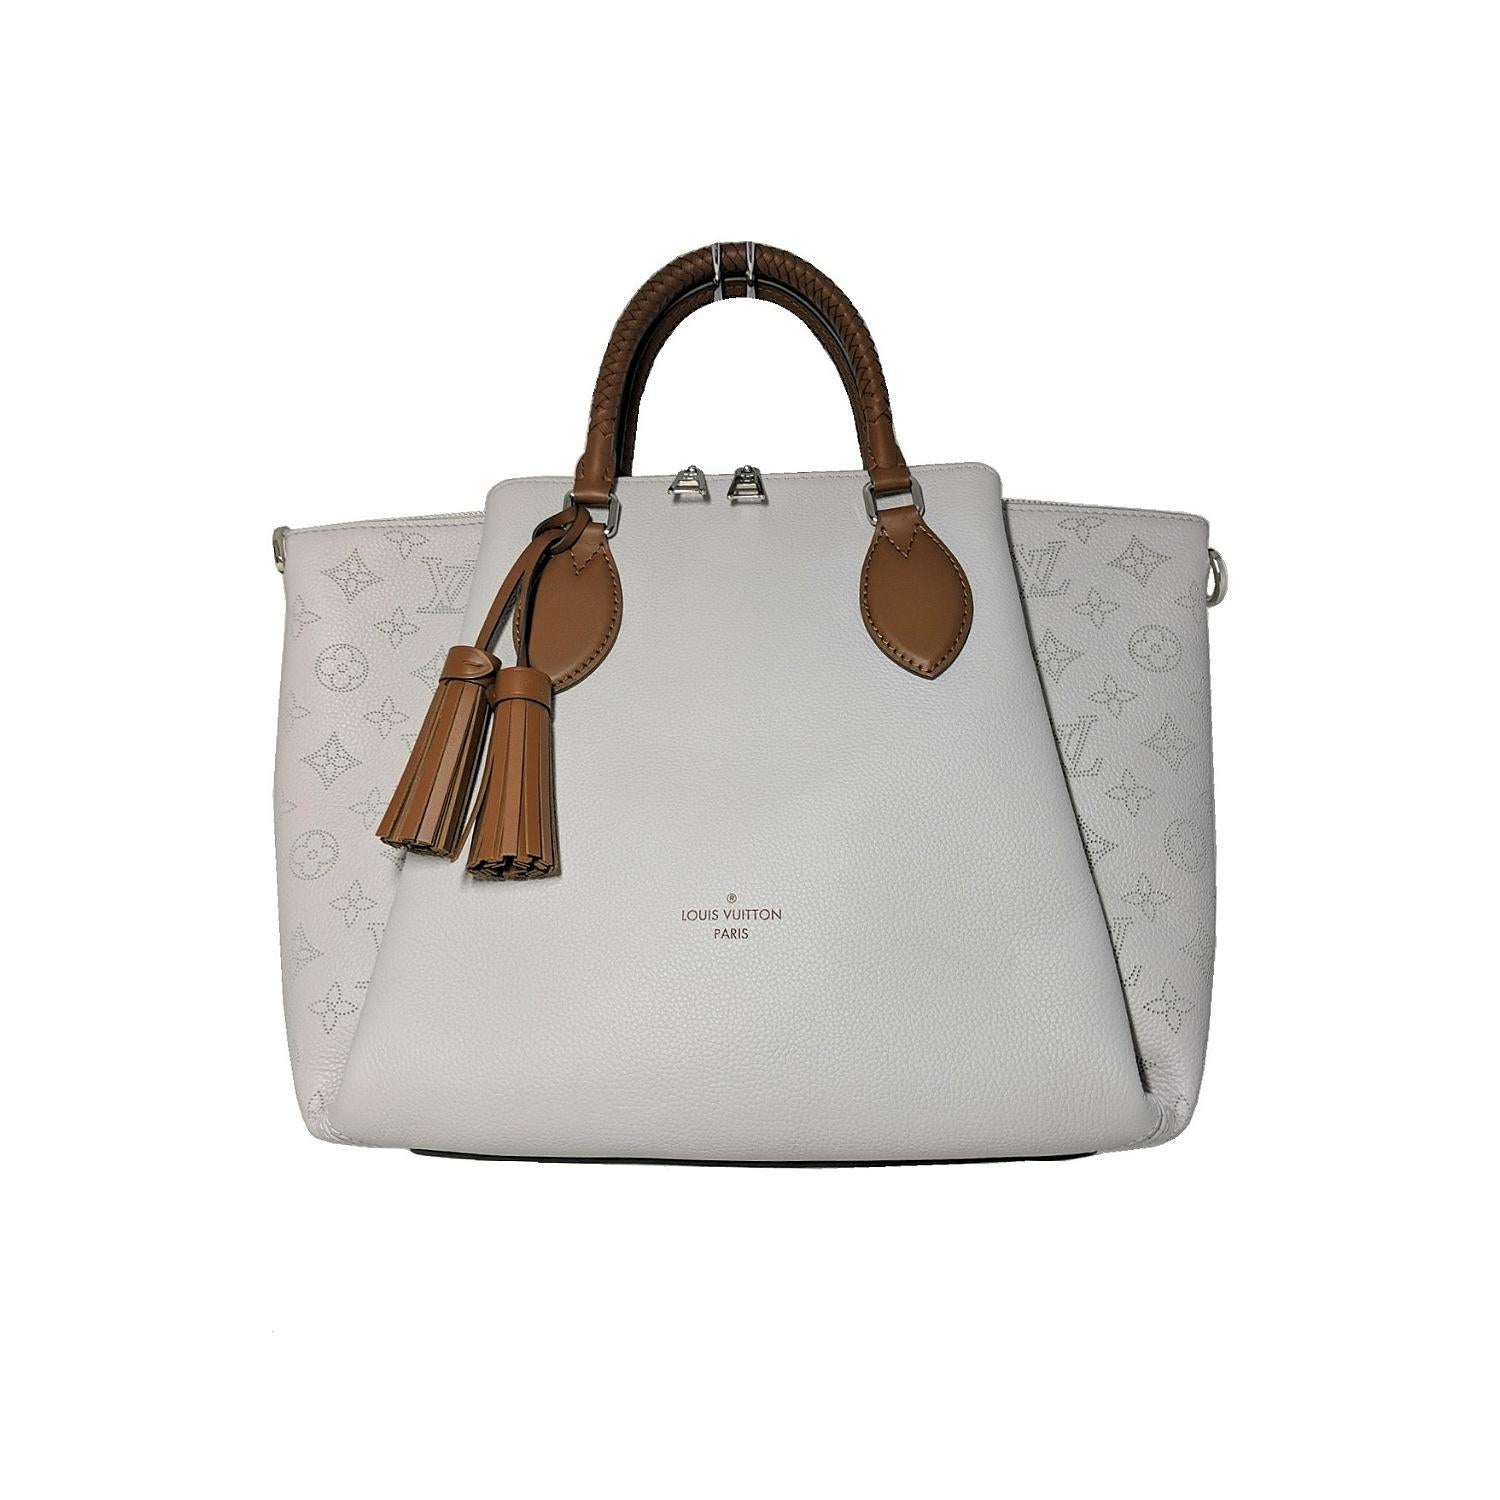 This chic handbag is crafted of grained calfskin leather. The shoulder bag features braided rolled beige leather top handles with matching tassel detailing at the front and silver hardware. This opens to a brown suede interior with flat pockets.